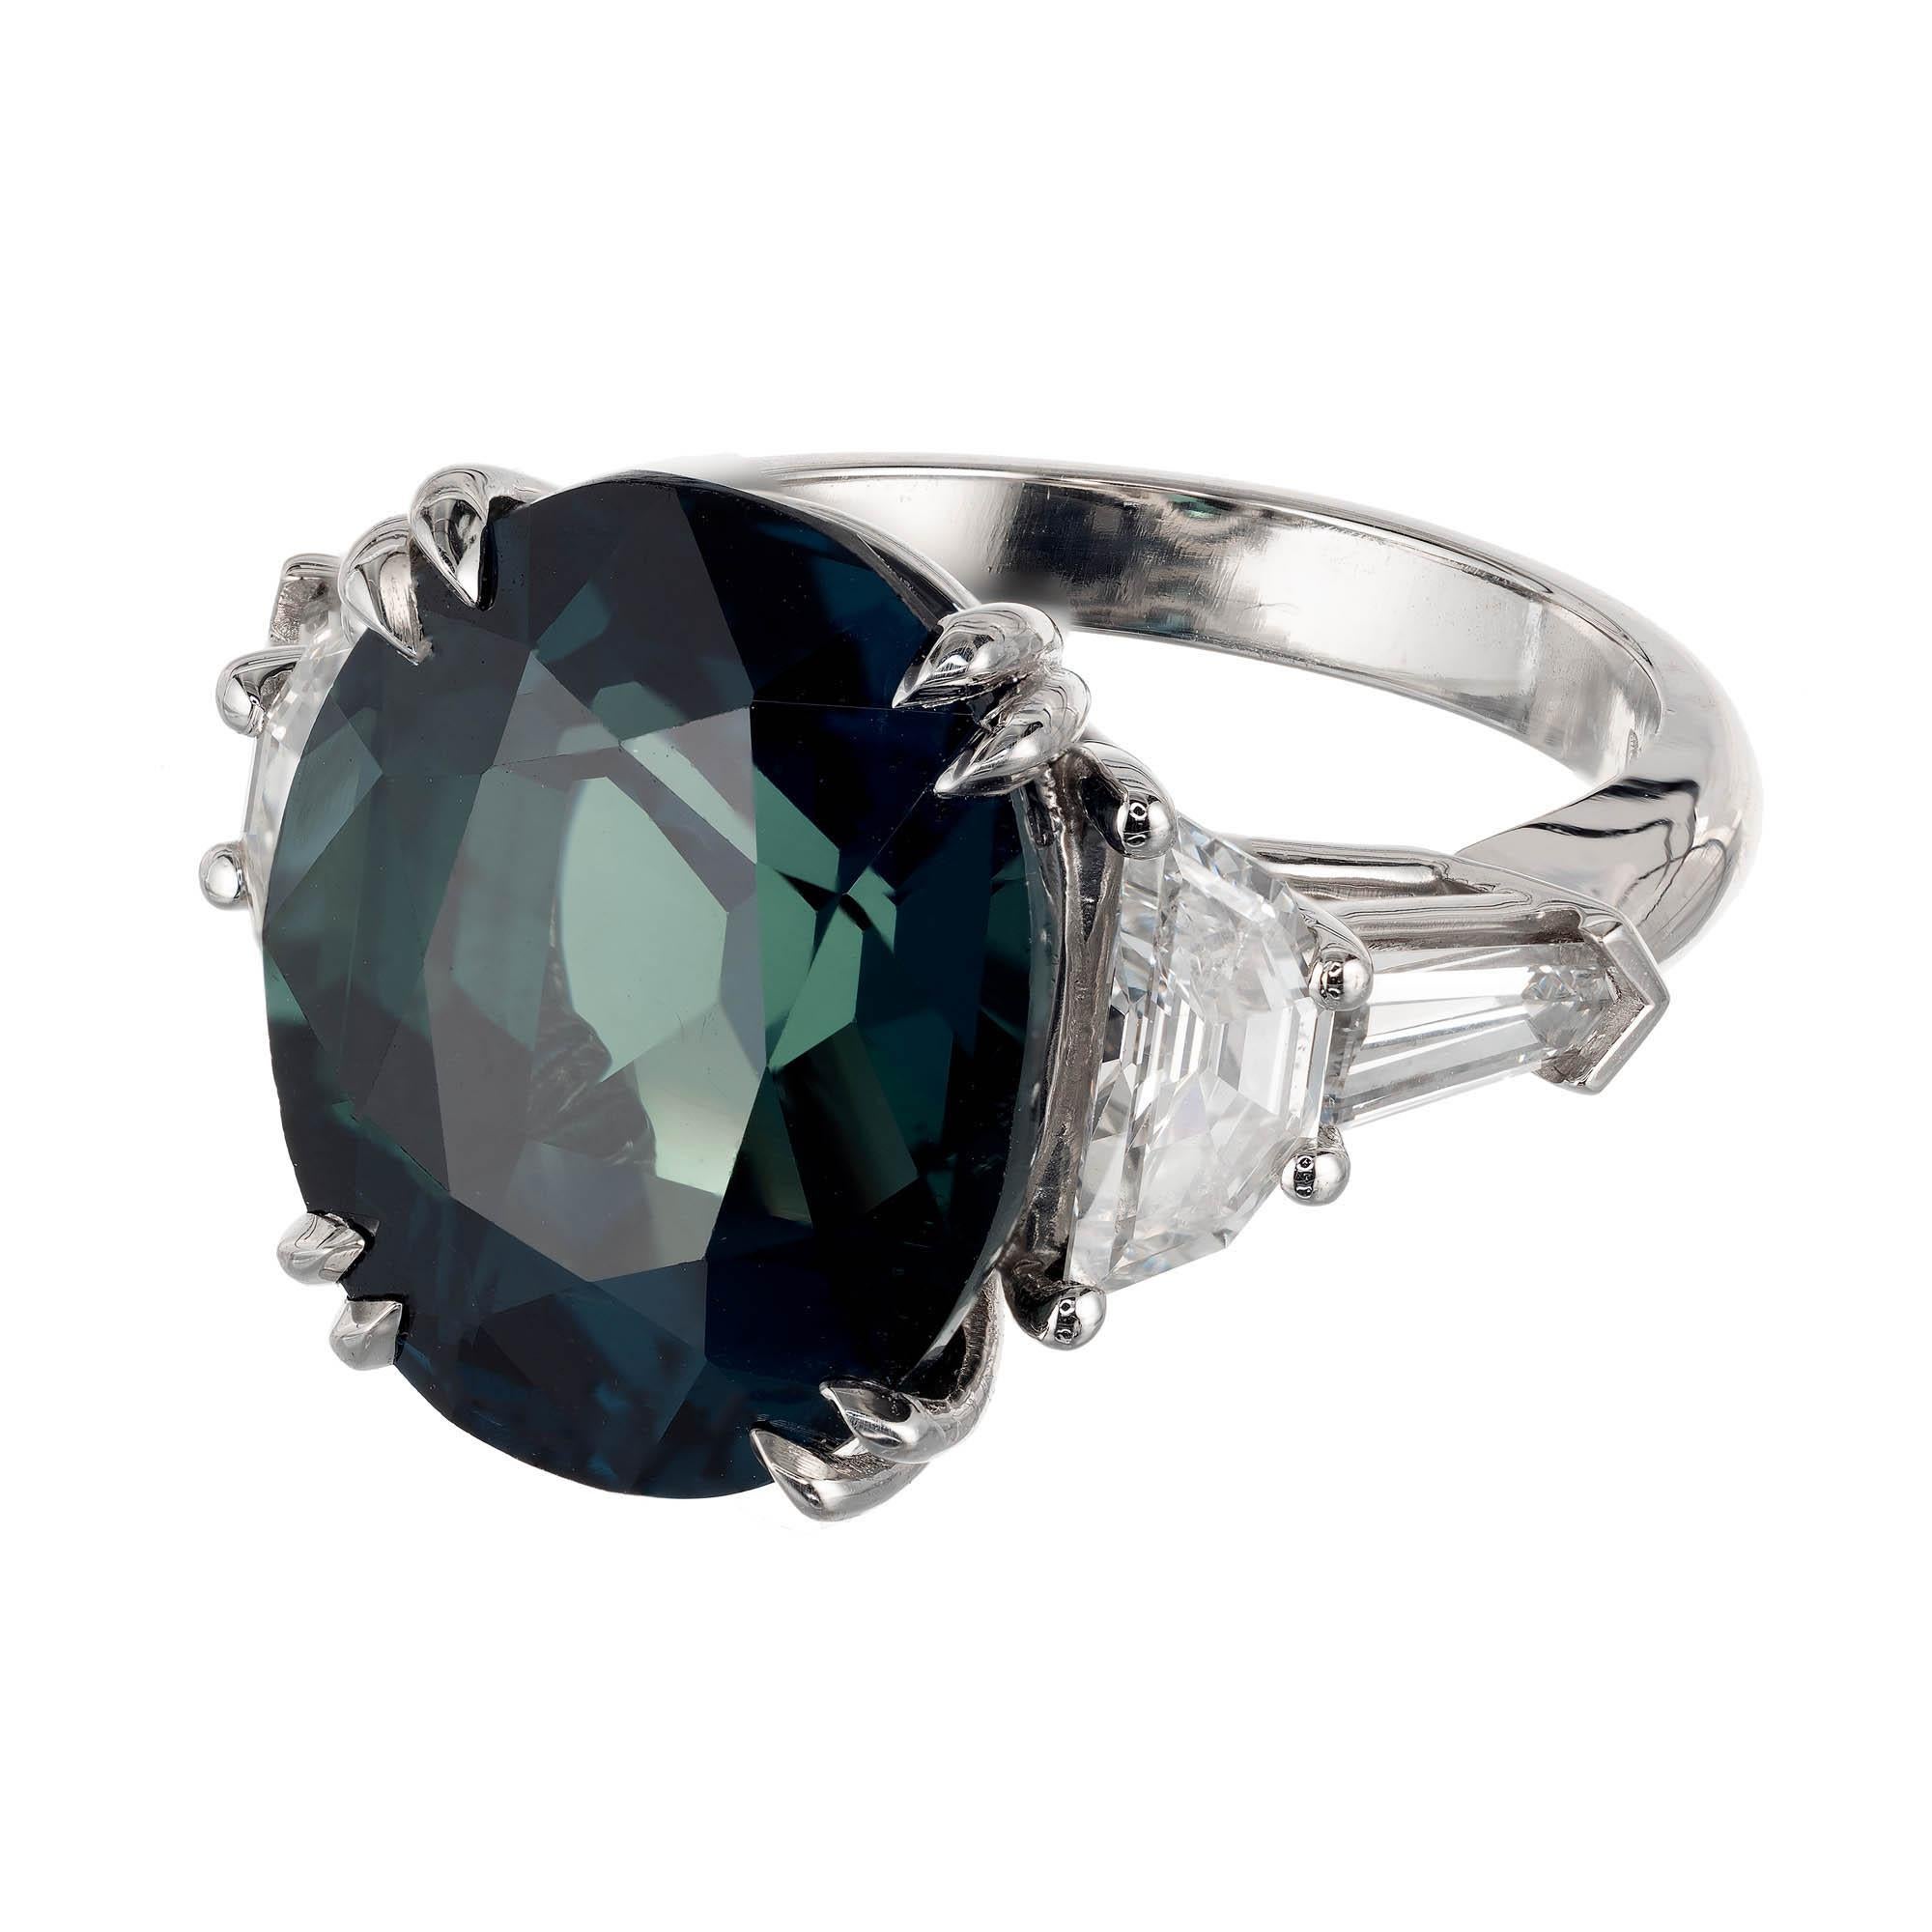 Teal green sapphire and diamond engagement ring. GIA certified natural no heat, untreated oval sapphire center stone, in a platinum setting with 2 half moon and 2 tapered baguette diamonds on each side of sapphire. Created in the Peter Suchy